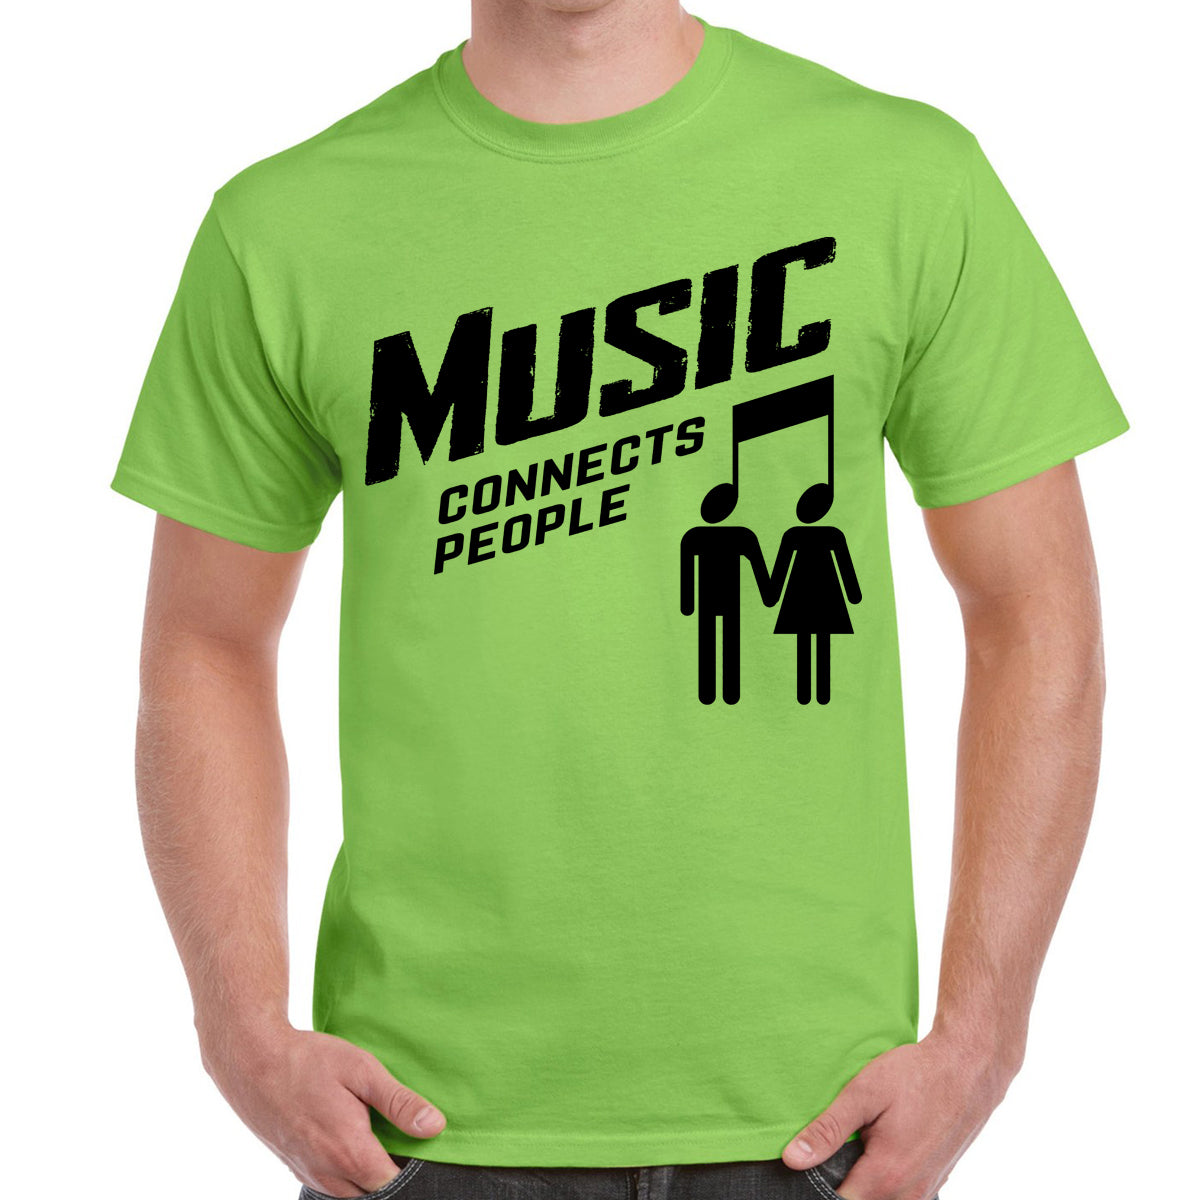 (DTGZ) Music Connects T-Shirt